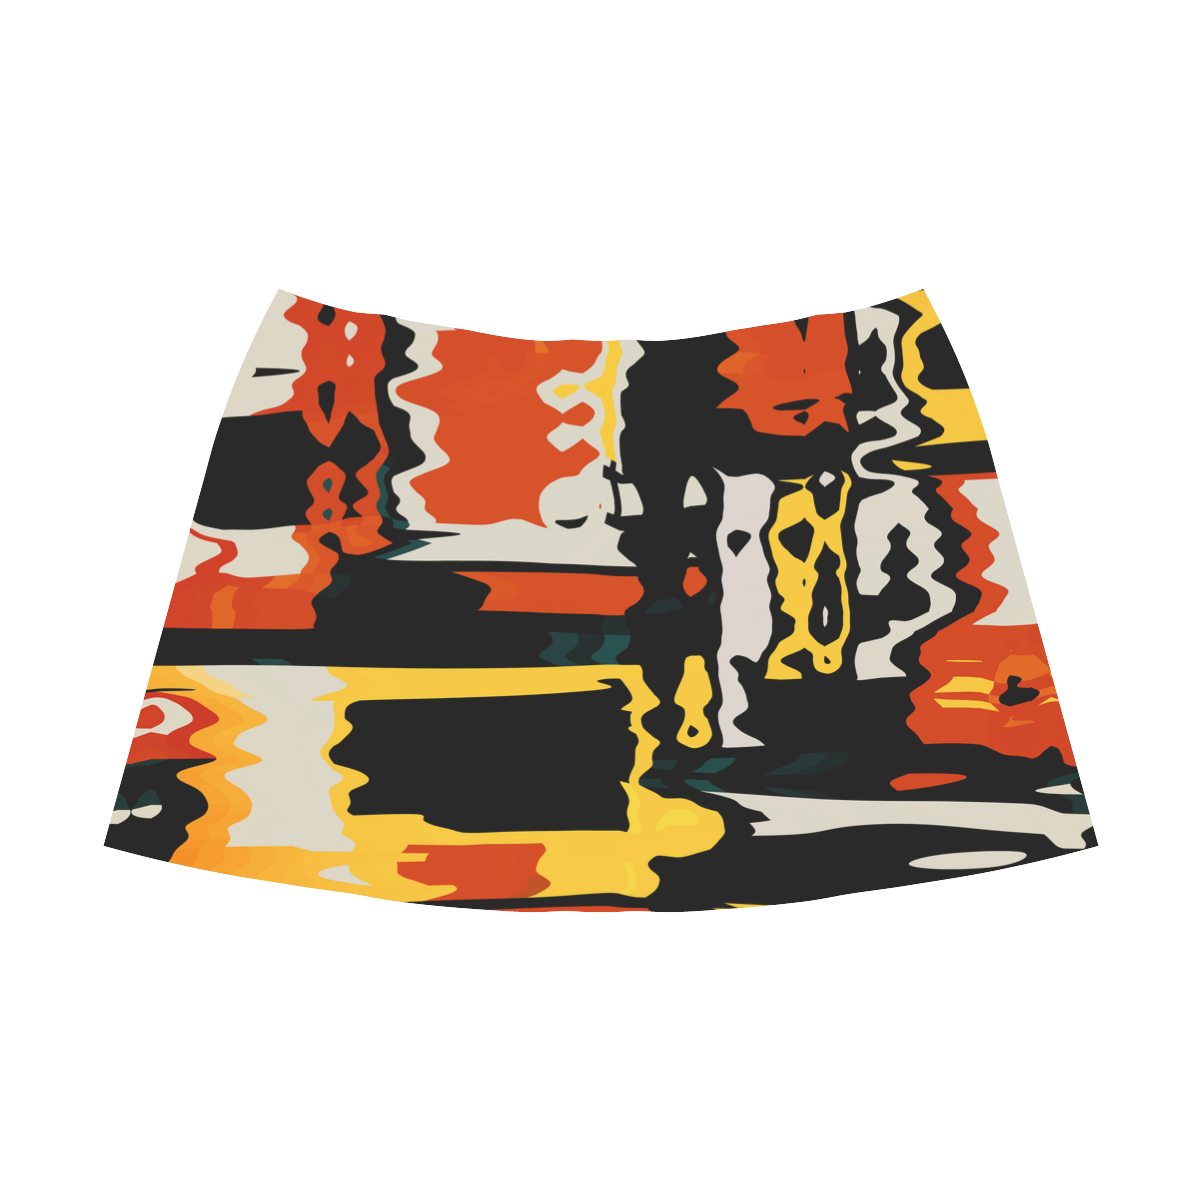 Distorted shapes in retro colors Mnemosyne Women's Crepe Skirt (Model D16)